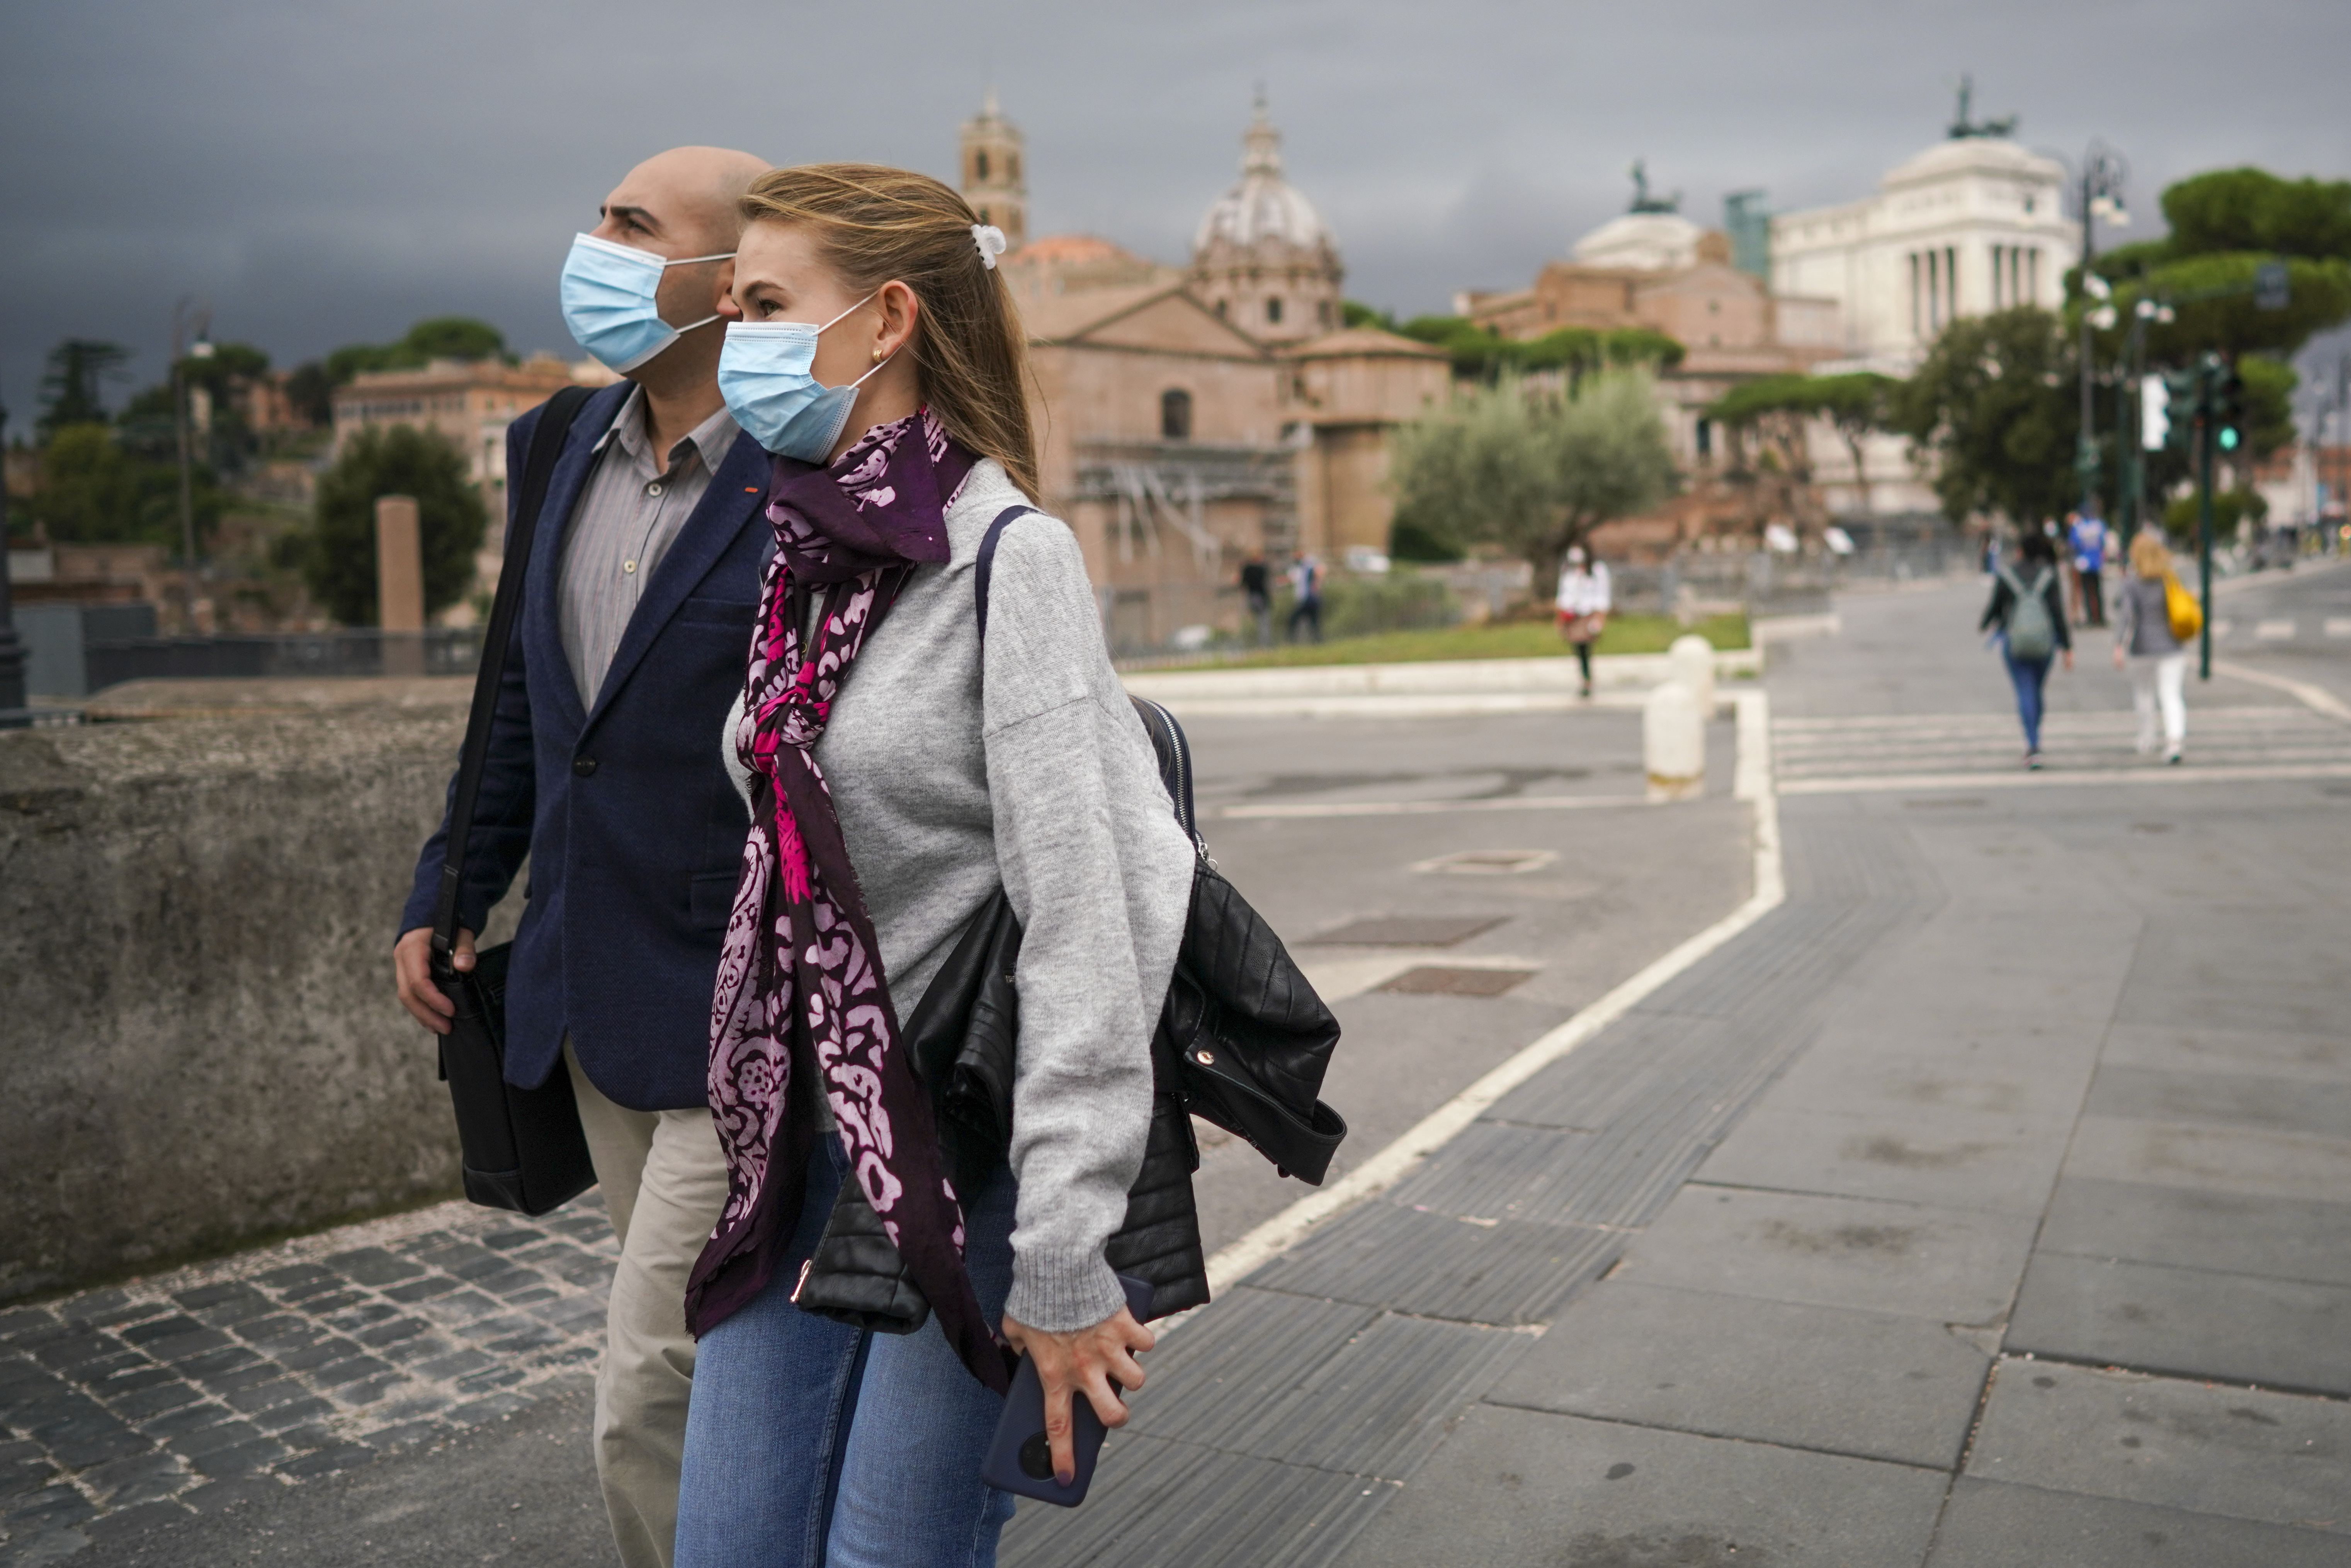 People wear face masks to prevent the spread of COVID-19 as they walk along the Fori Imperiali avenue, in Rome, Saturday, Oct. 3, 2020. As of Saturday it is mandatory to wear masks outdoors in Lazio, the region that includes Rome. (AP Photo/Andrew Medichini)